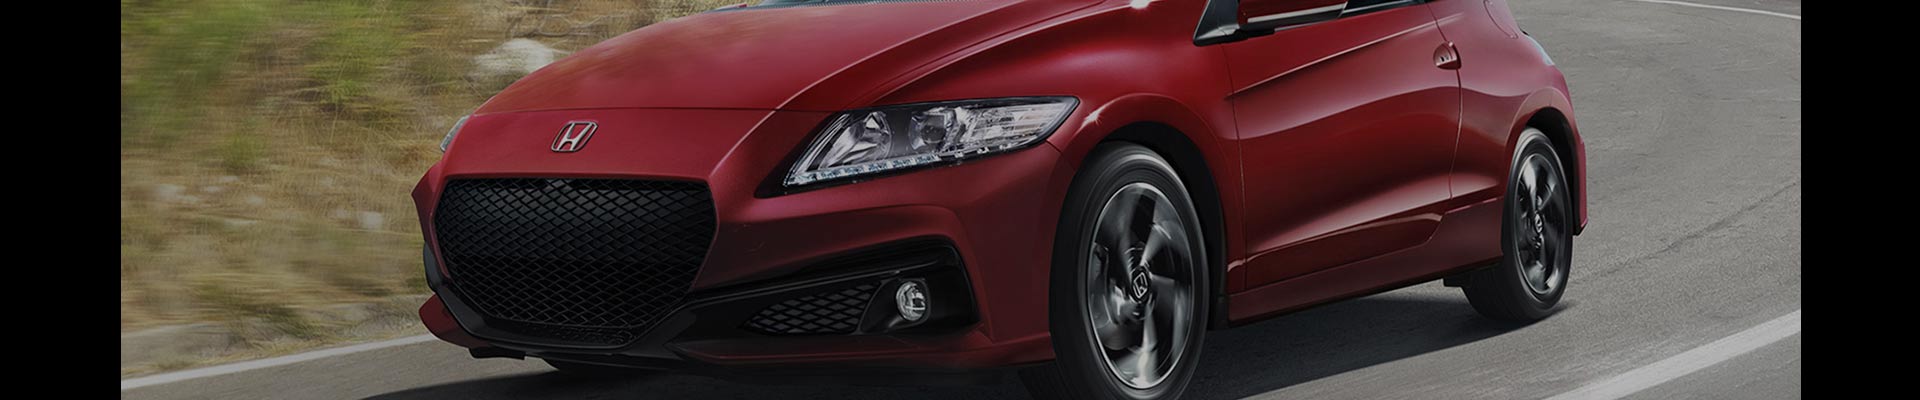 Shop Replacement and OEM 2016 Honda CR-Z Parts with Discounted Price on the Net